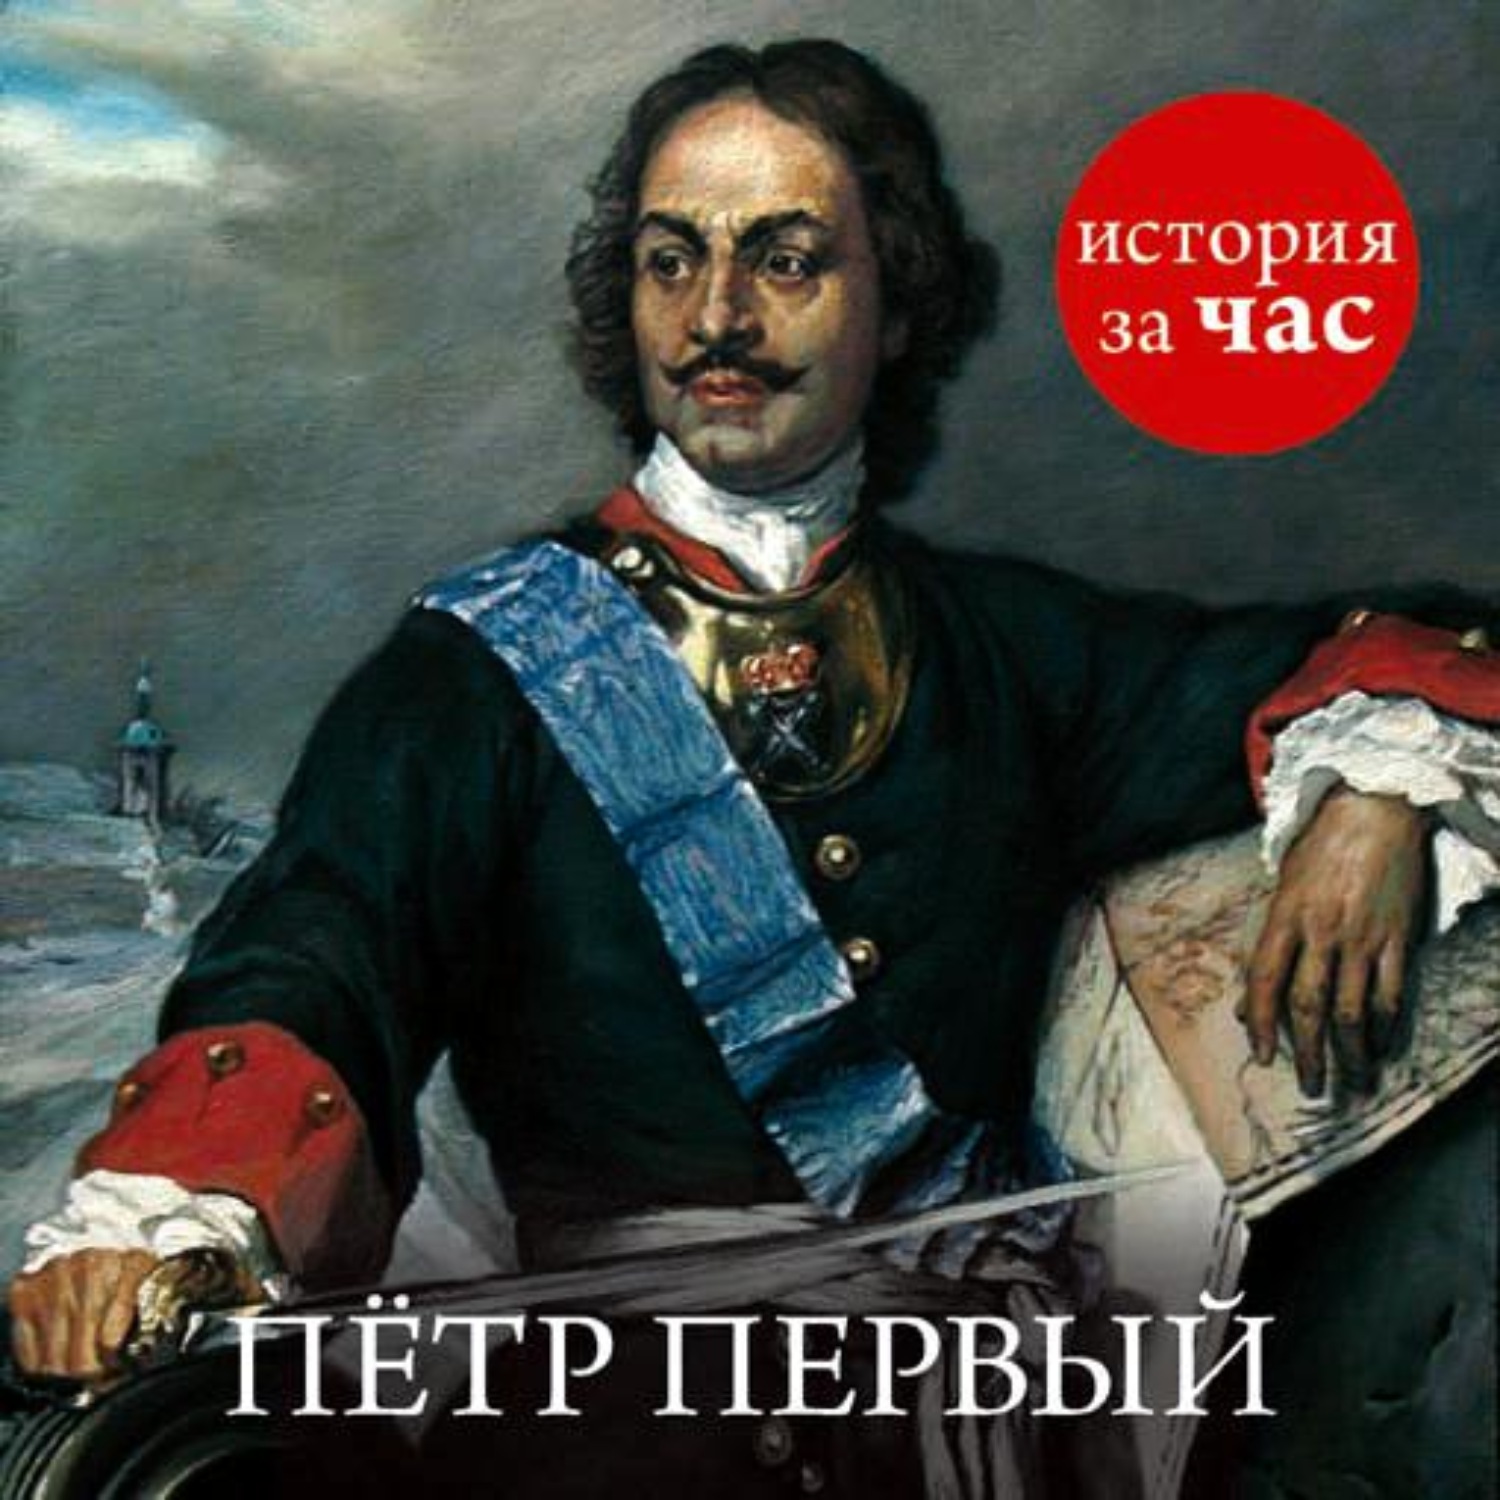 Peter 1 peter the great